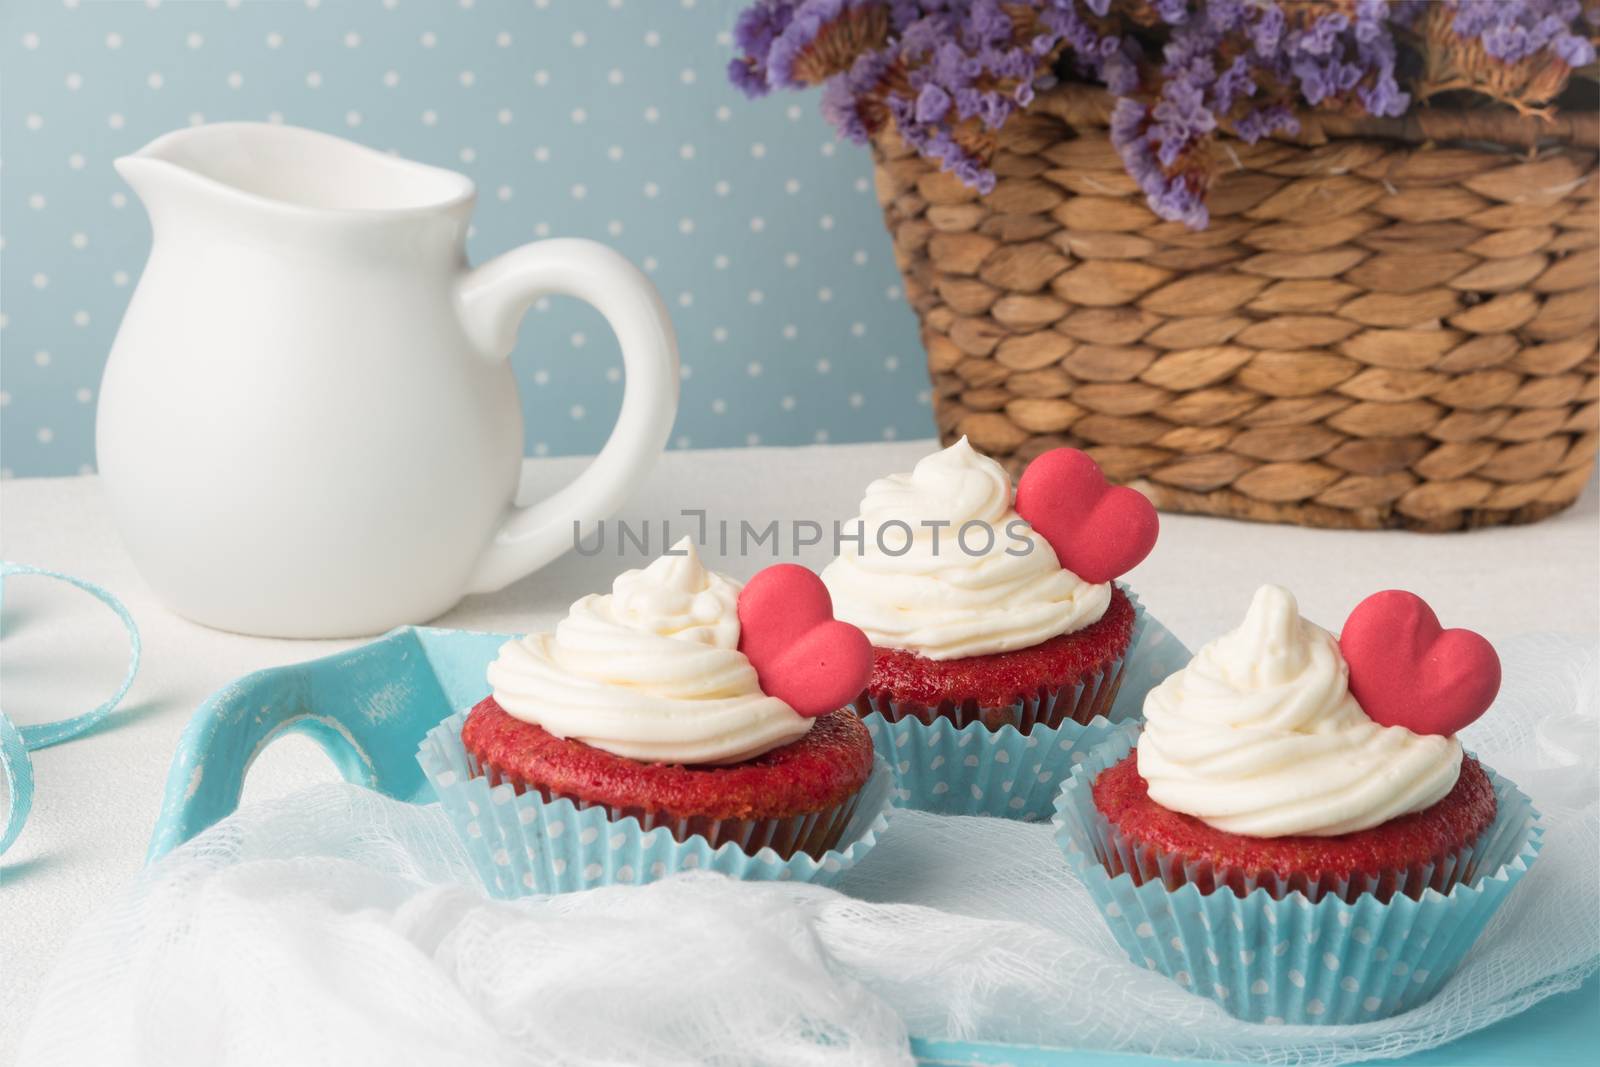 Heart cupcakes for Valentine's Day by AnaMarques